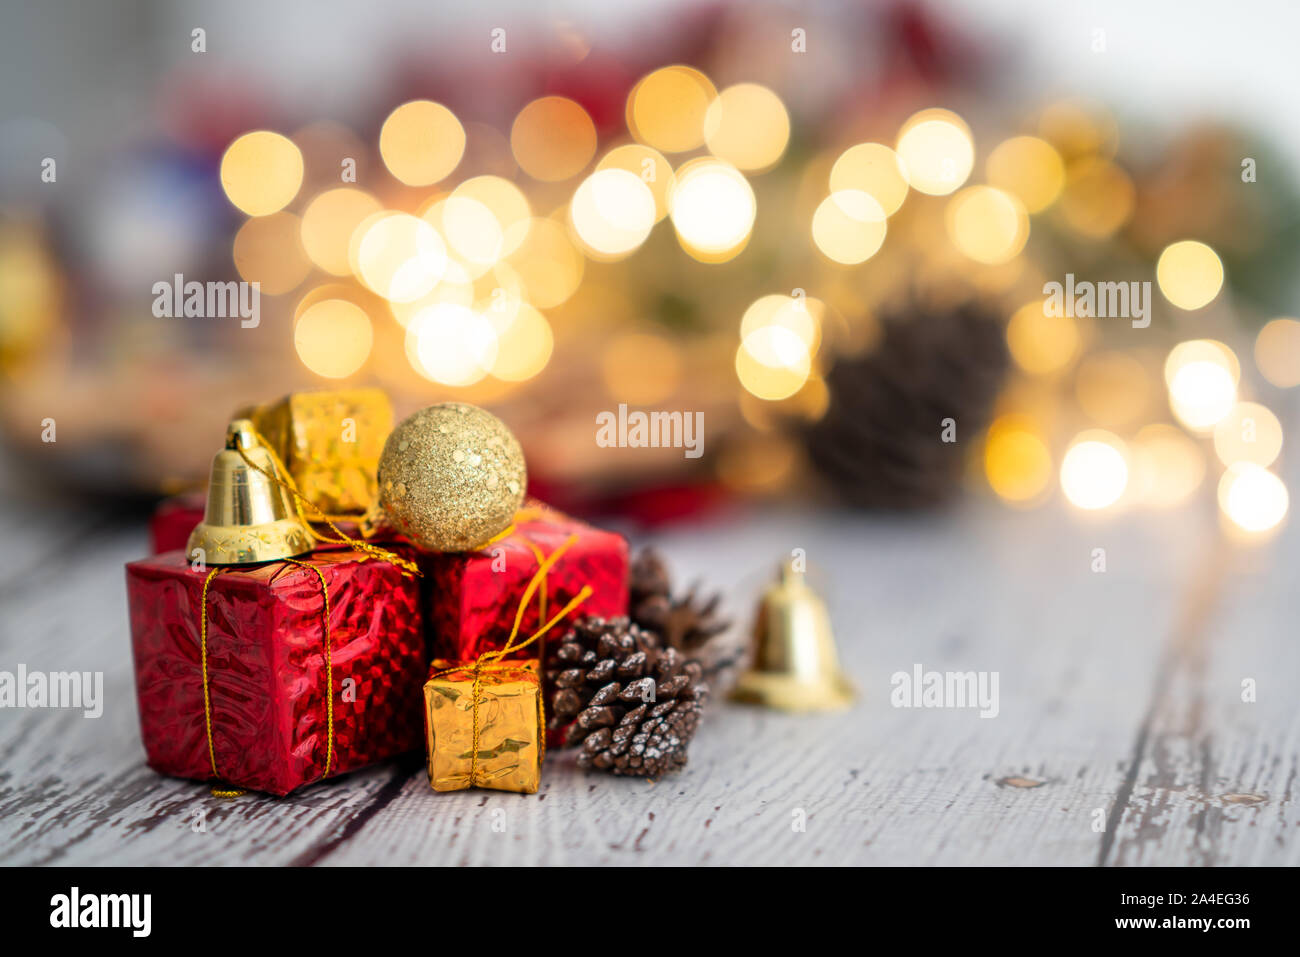 Preparing christmas gifts with ornaments for new year decoration. Stock Photo